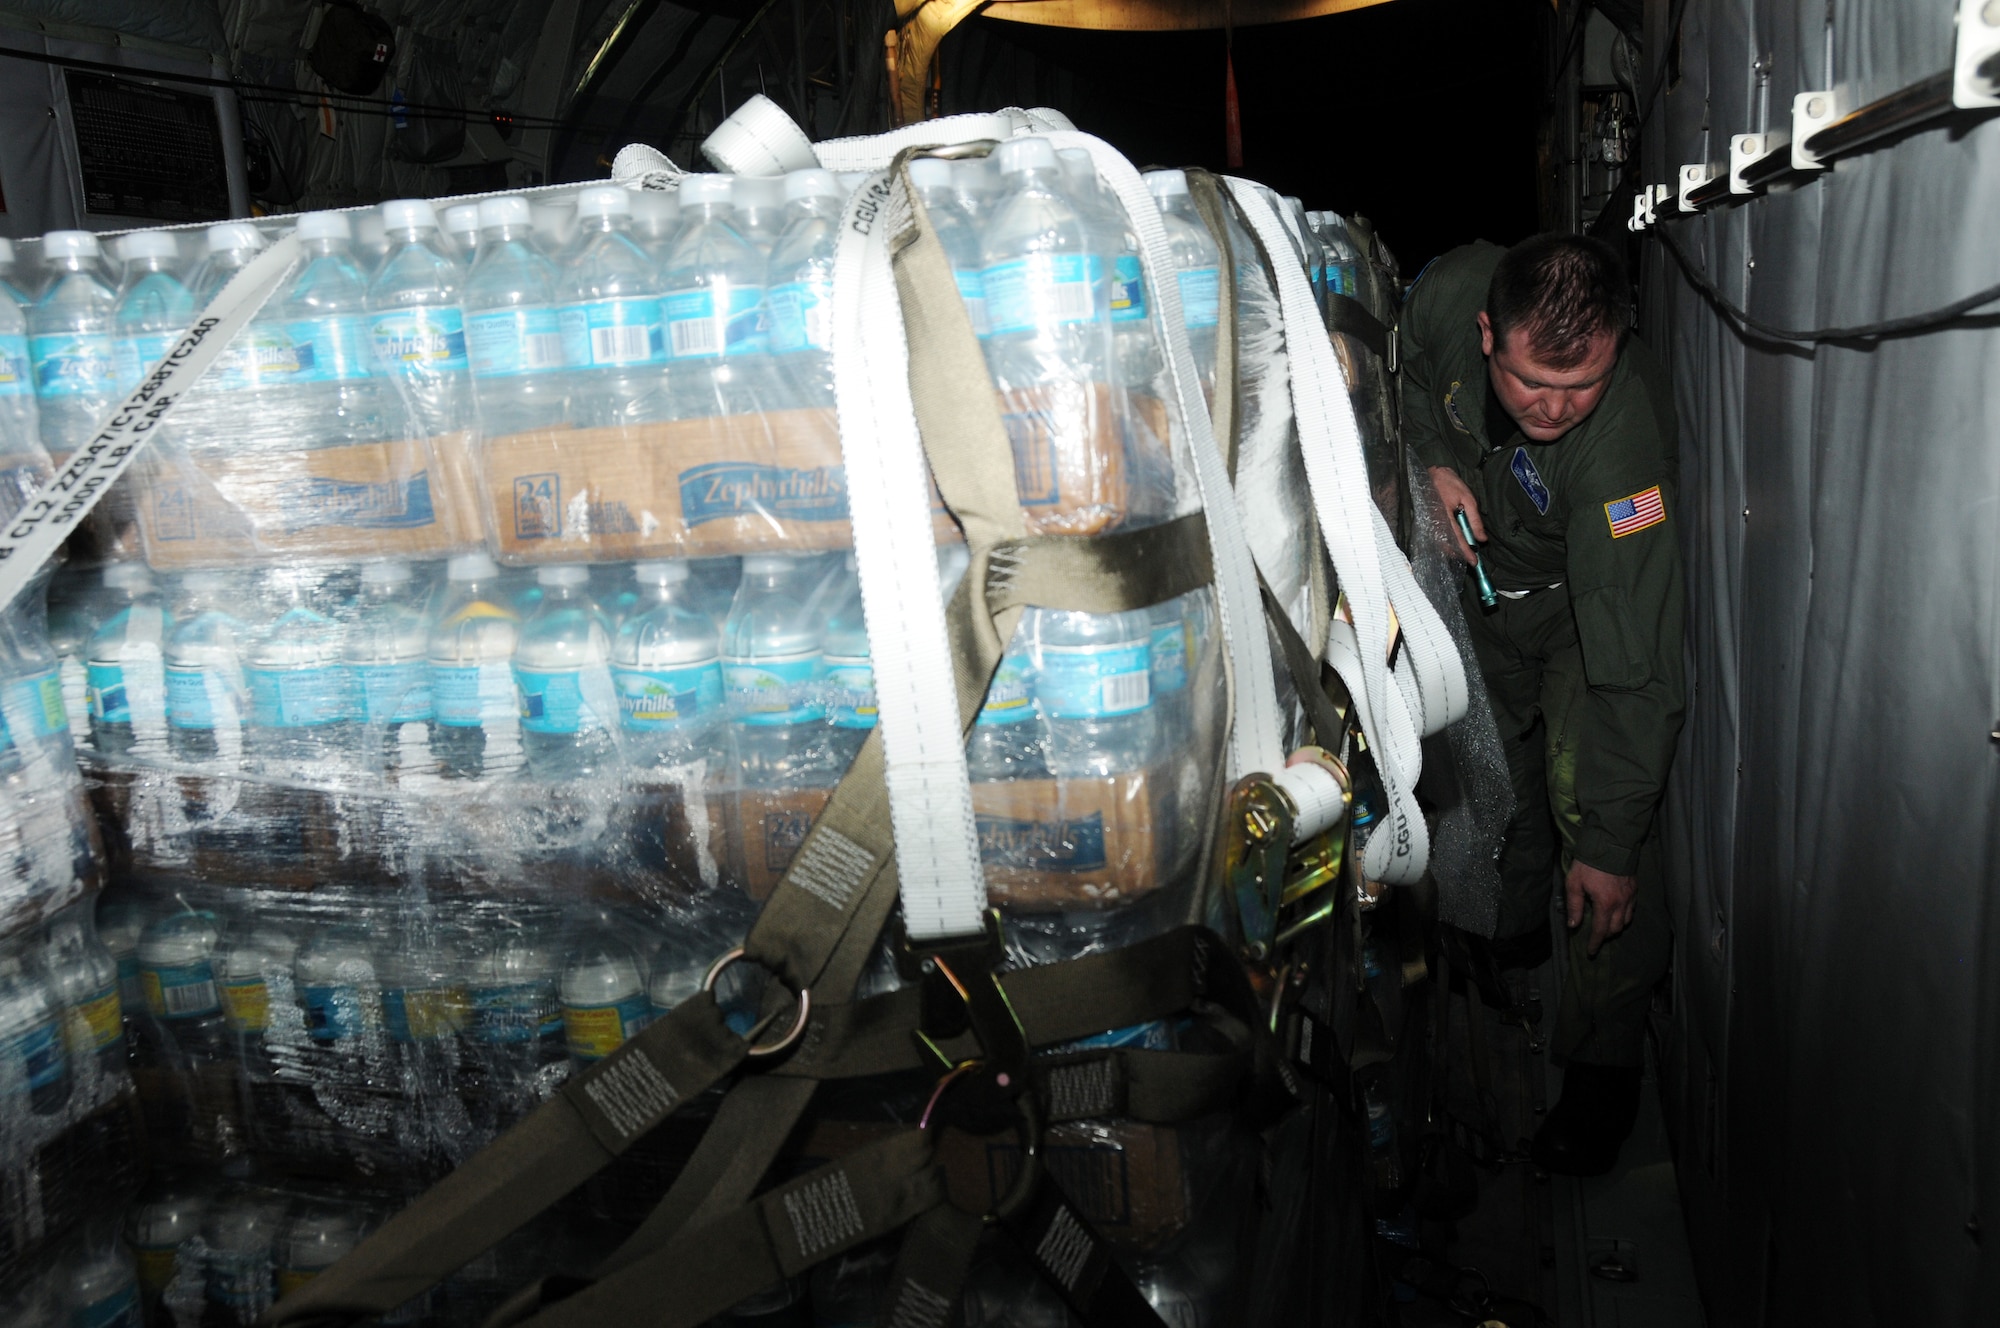 Senior Master Sgt. Thomas Obrochta 107th C-130 load master ensures that the pallets of water destine for Haiti are secure. "Everything needs to be secured for flight," said Obrochta." If it's not bolted down, it gets strap it down," he added.  The 107th has provided crews along with aircraft for the transportation of supplies into and evacuees out of Haiti since four days after the earthquake hit.  (U.S. Air Force photo/Staff Sgt. Peter Dean)